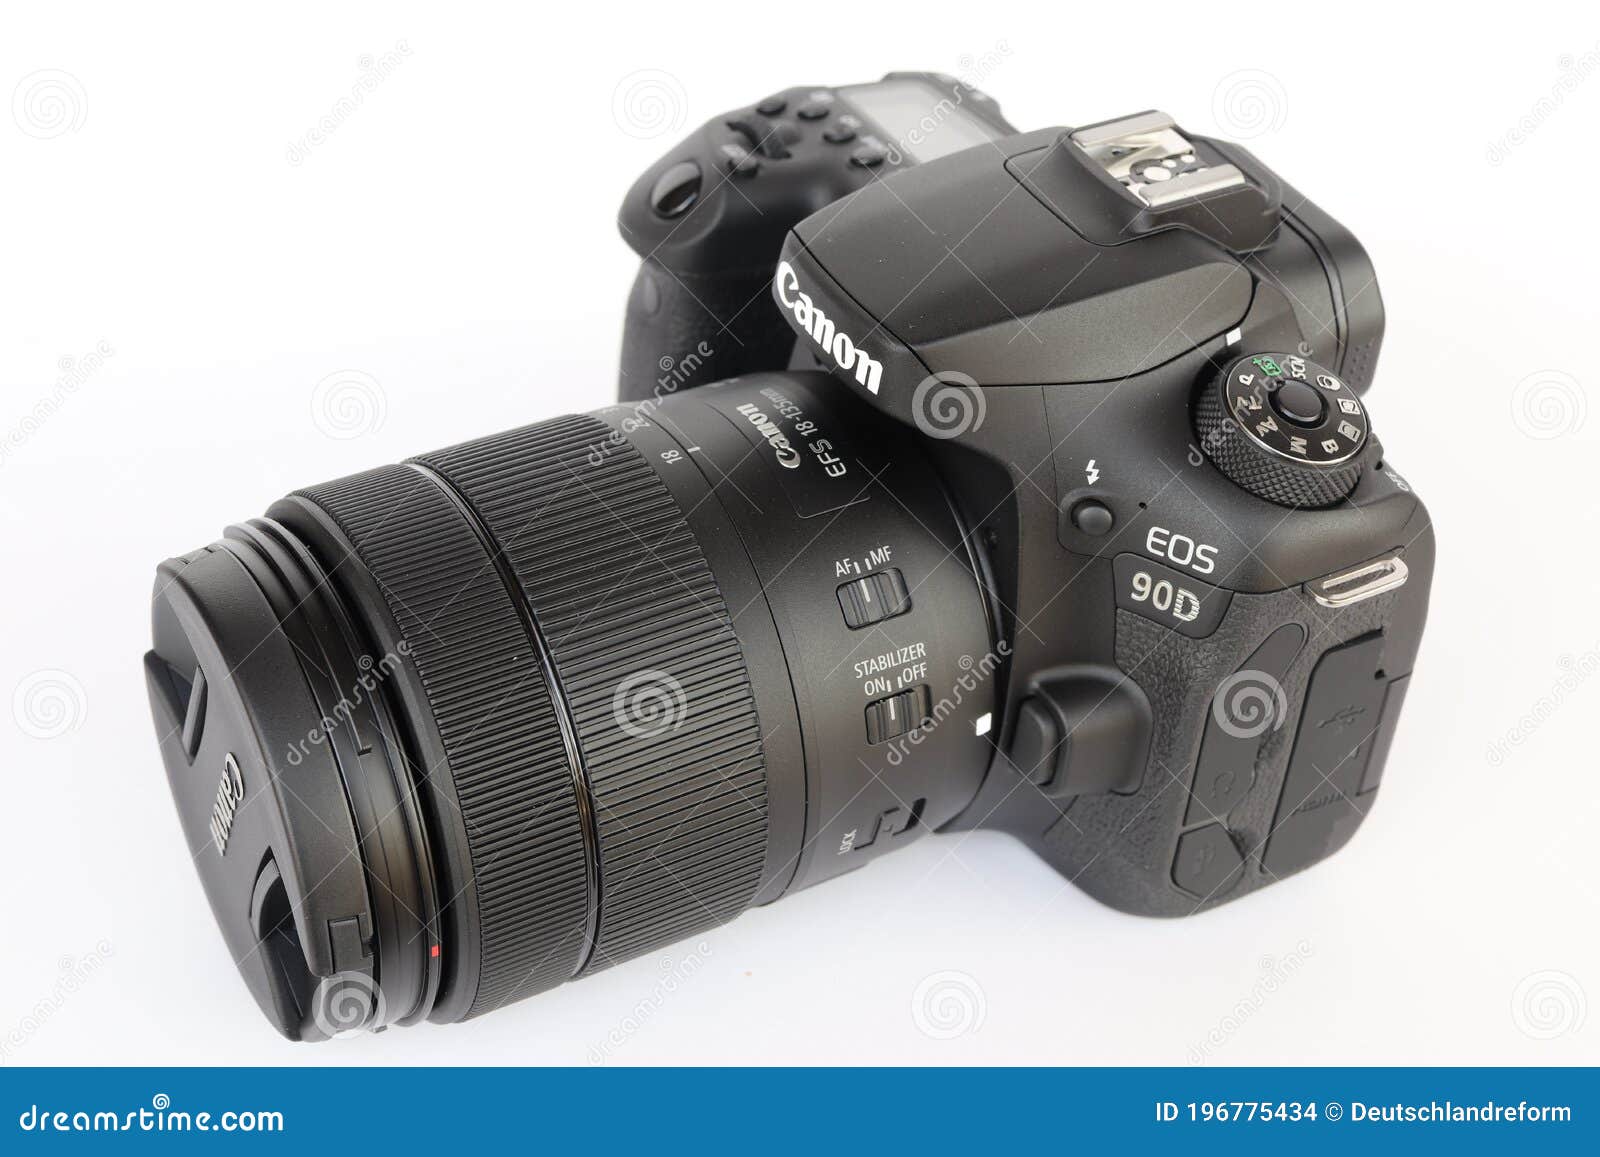 Canon Eos 90d With Ef S 18 135mm F 3 5 5 6 Is Usm Lens Editorial Stock Image Image Of Close Lens